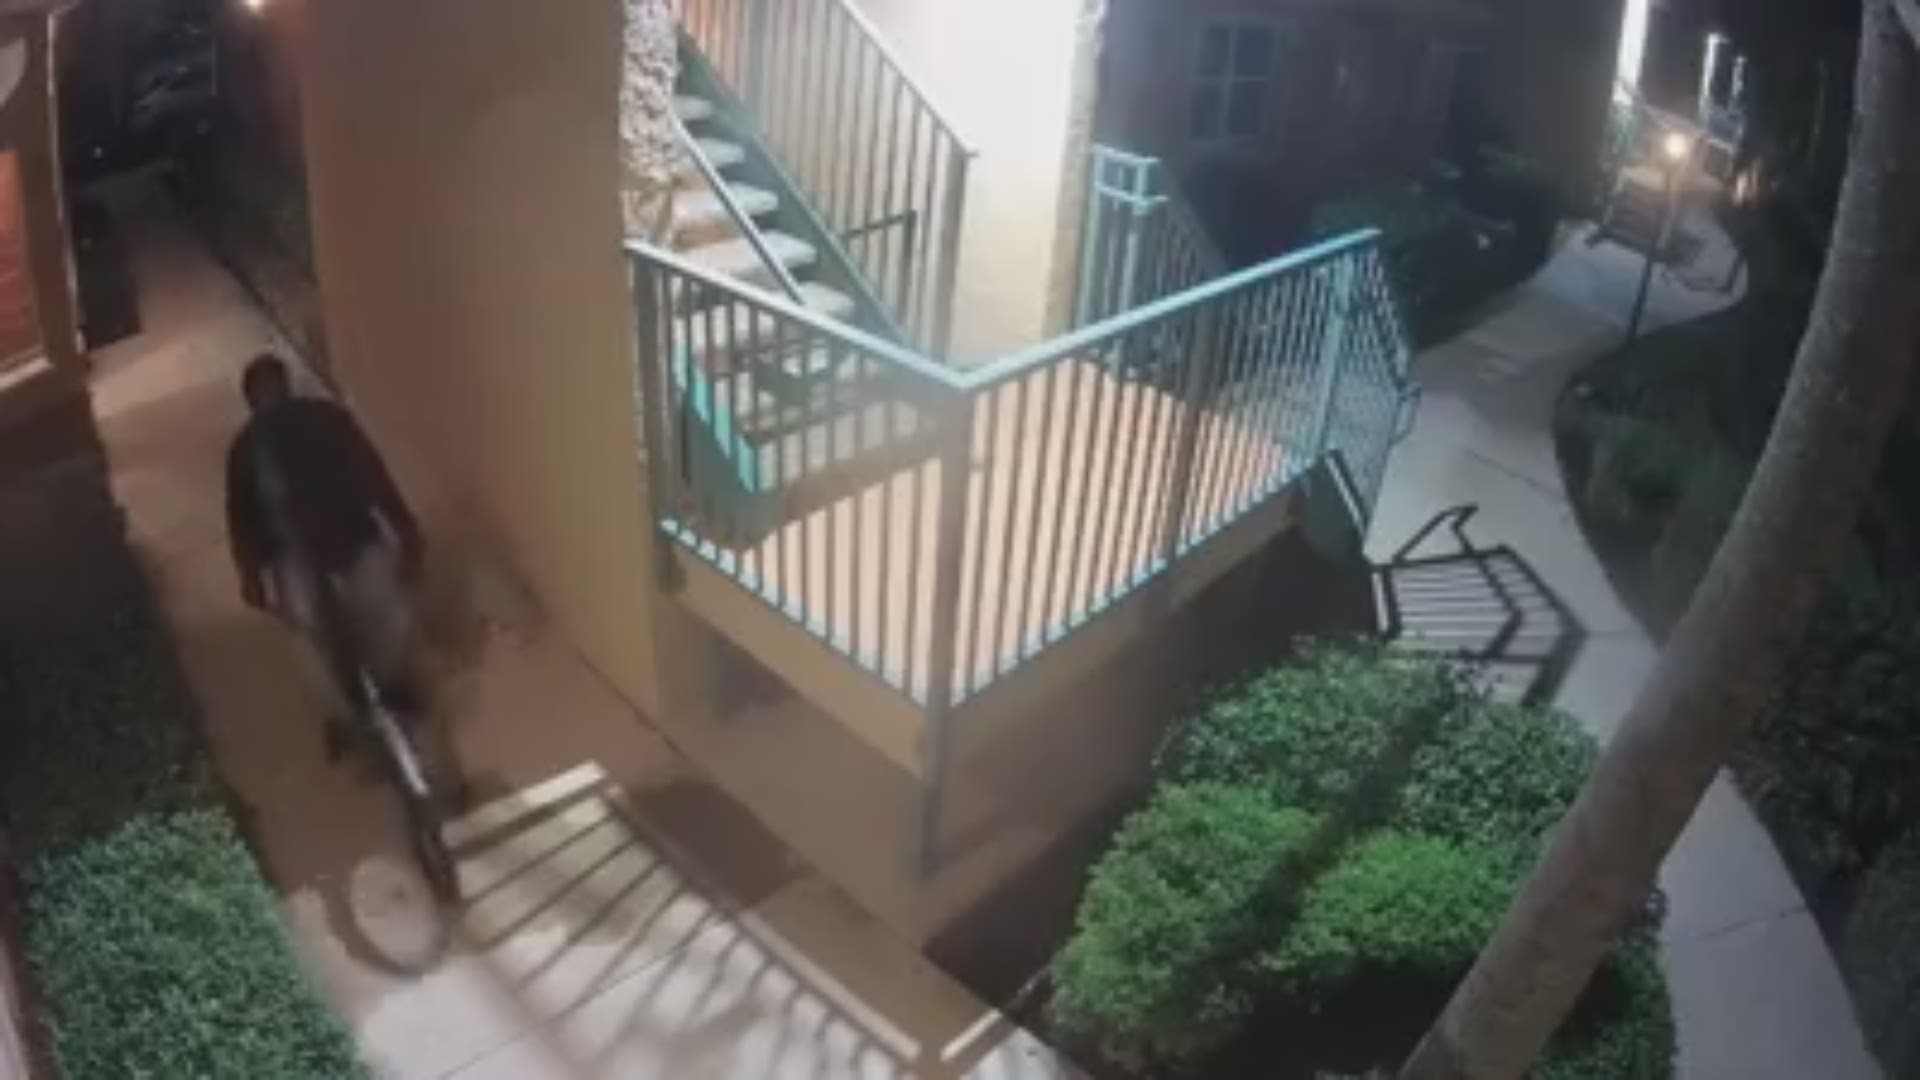 FCN obtained video of a bike being stolen from a condo complex, a week after we first told you of a possible bike 'chop shop' being found in Jax Beach.